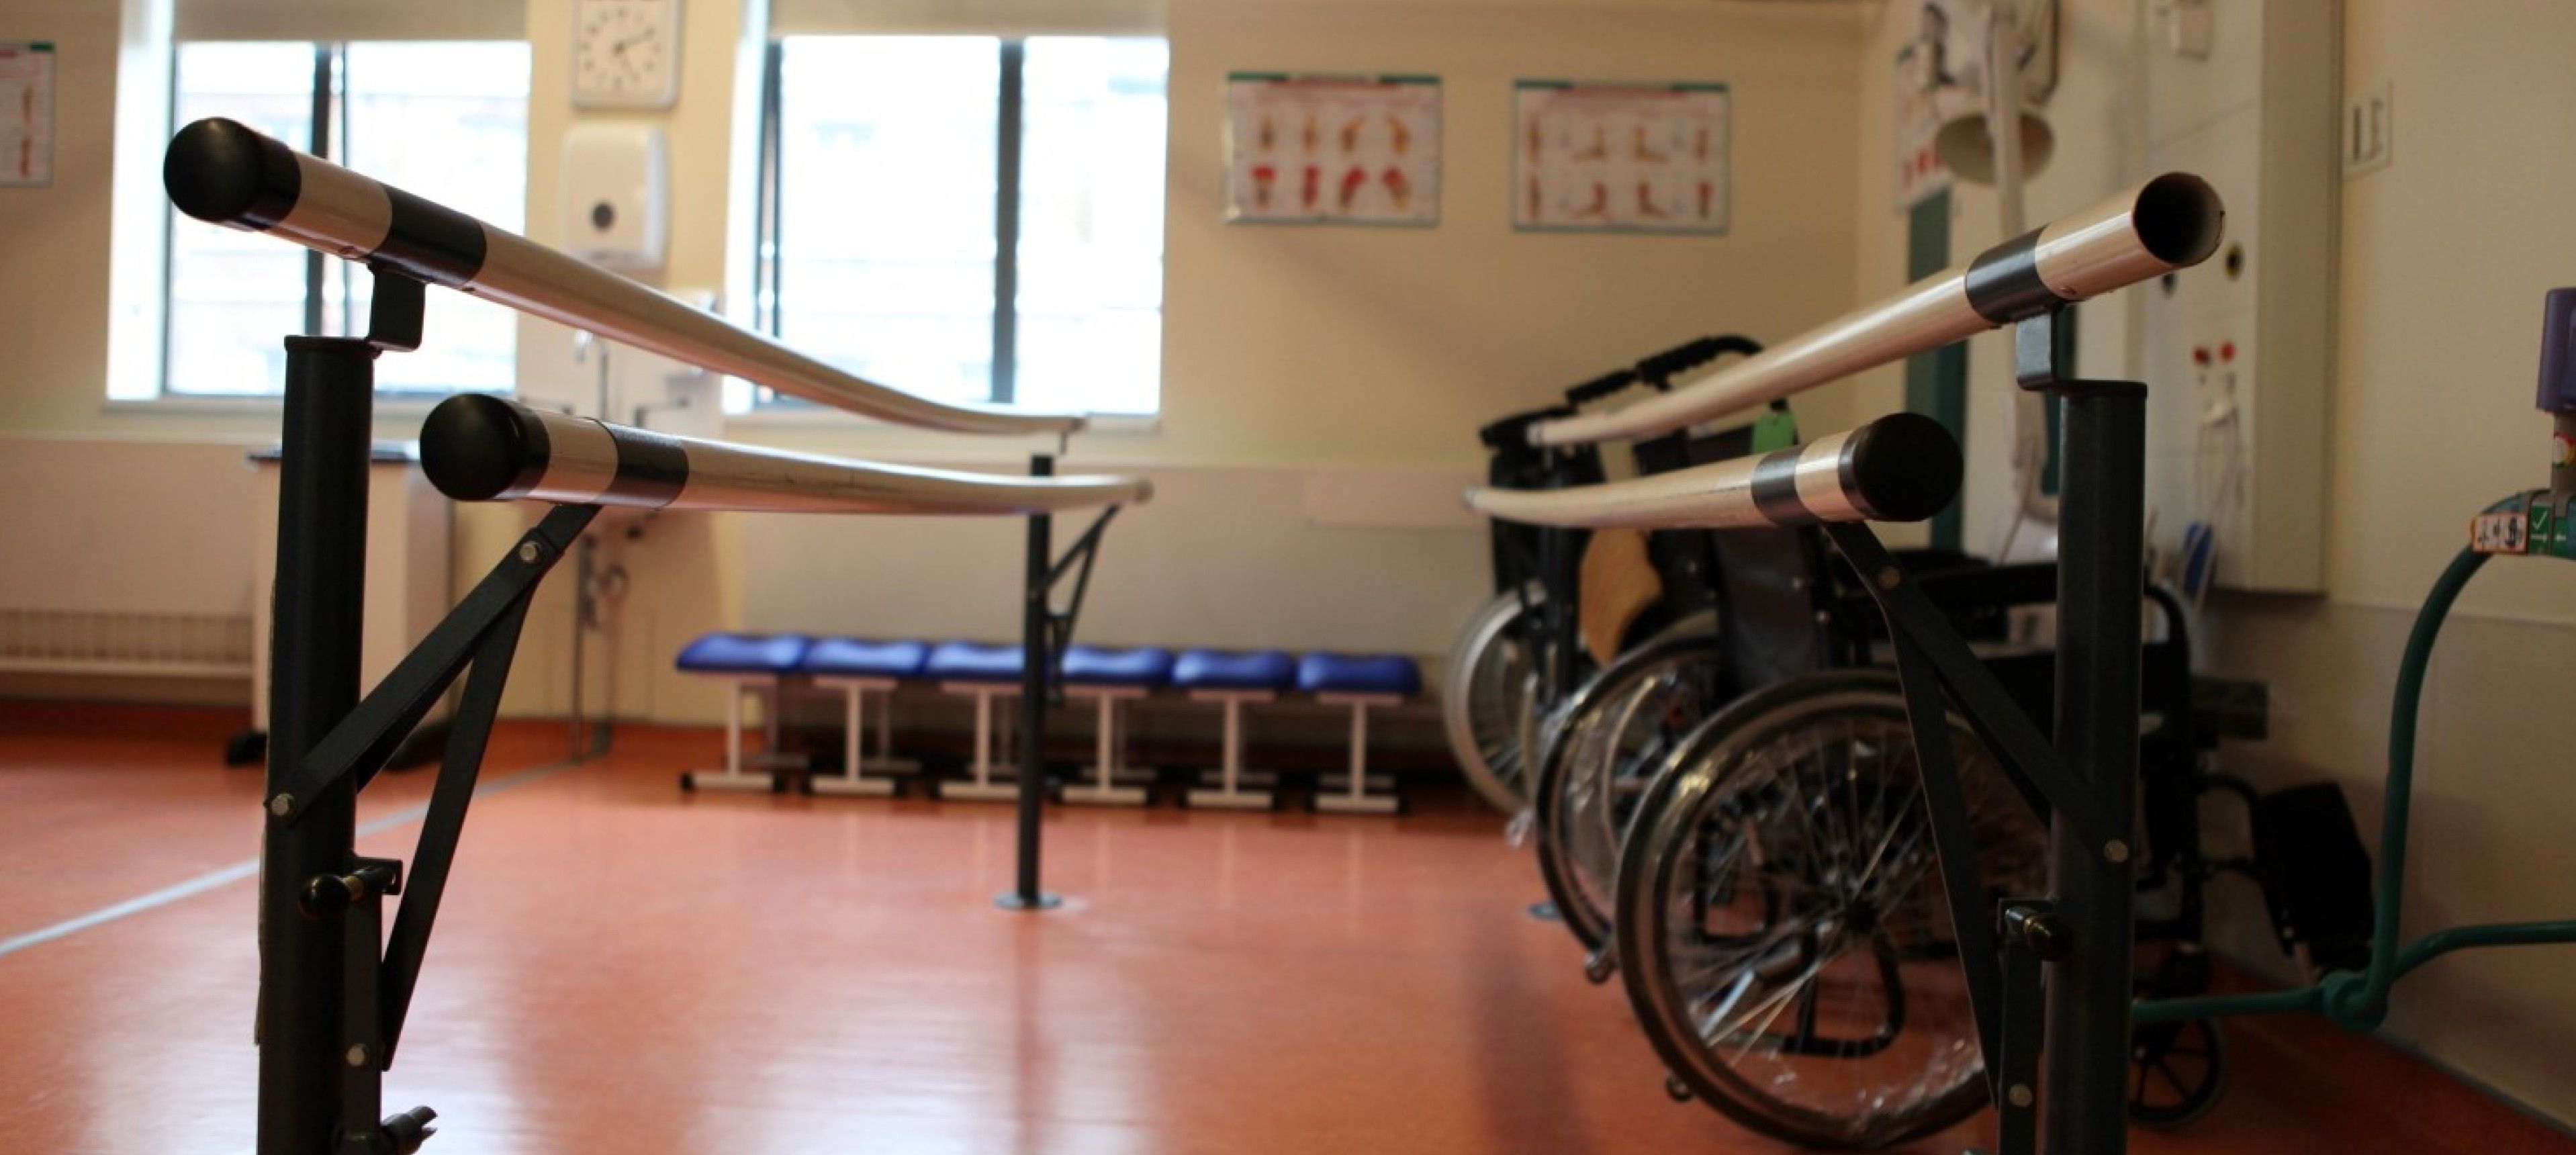 Photo of parallel bars used for rehabilitation and wheelchairs